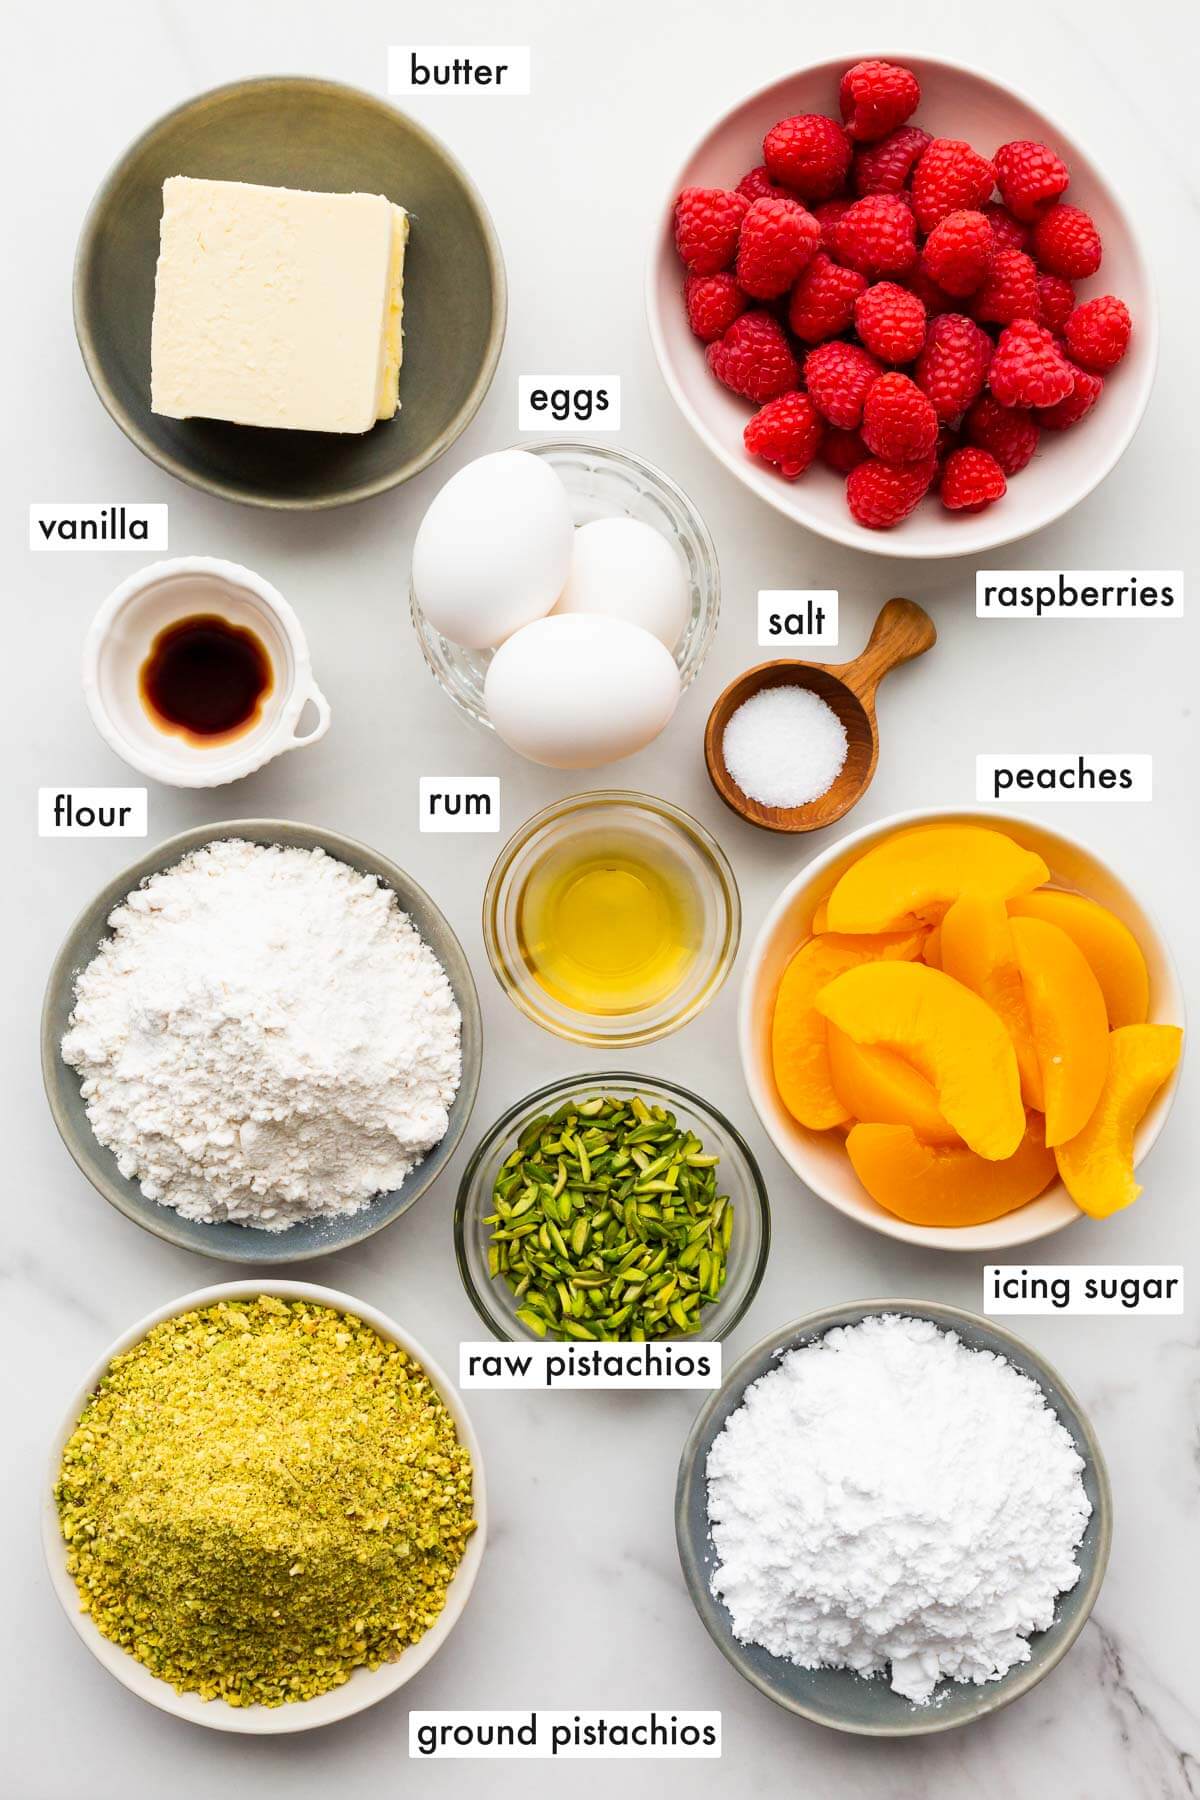 Ingredients to make a pistachio tart from scratch that you will top with fruits (such as sliced peaches and raspberries, pictured in this photo).